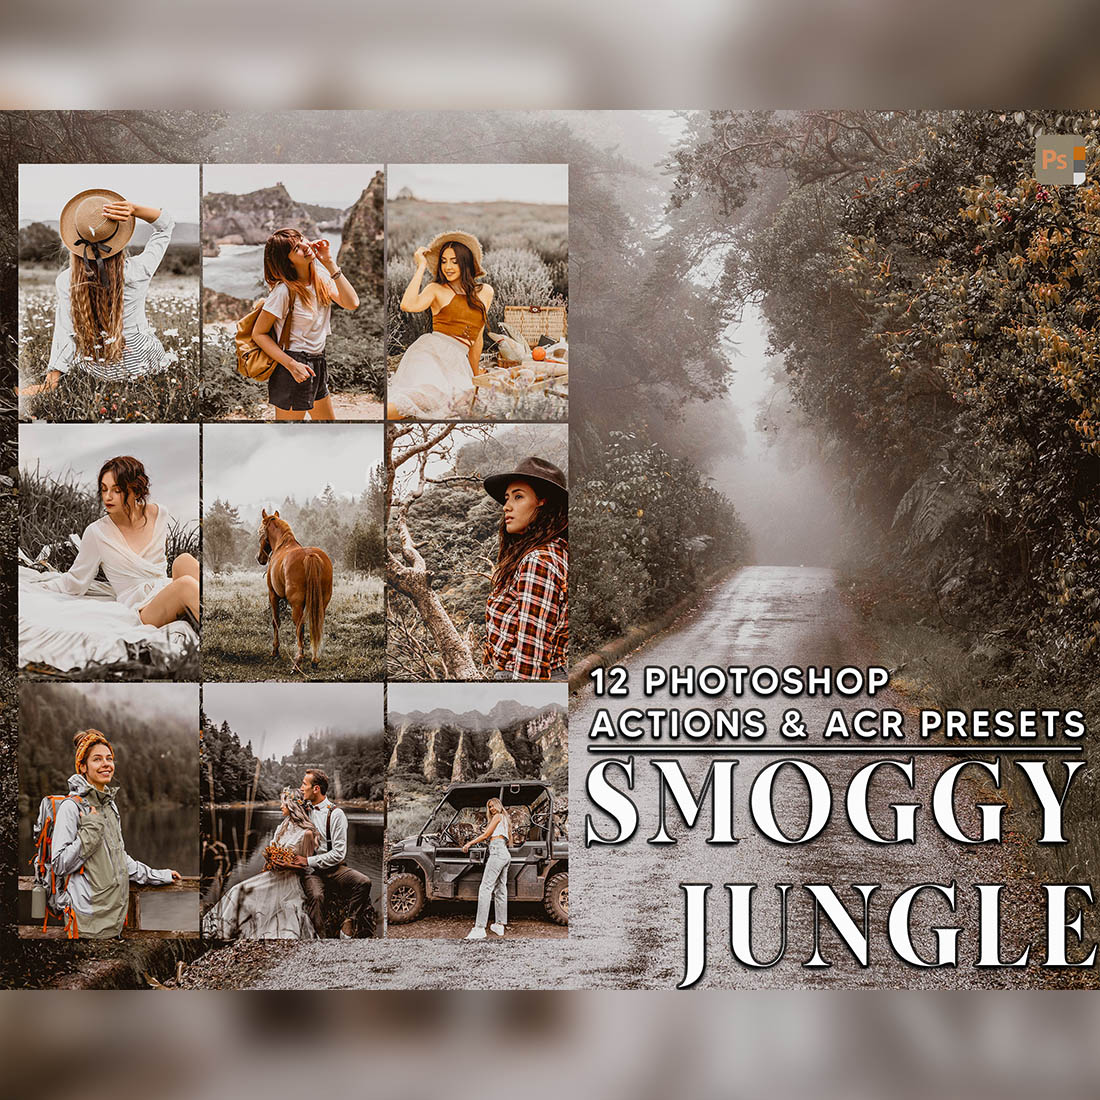 12 Photoshop Actions, Smoggy Jungle Ps Action, Foggy ACR Preset, Forest Moody Ps Filter, Atn Portrait And Lifestyle Theme For Instagram, Blogger cover image.